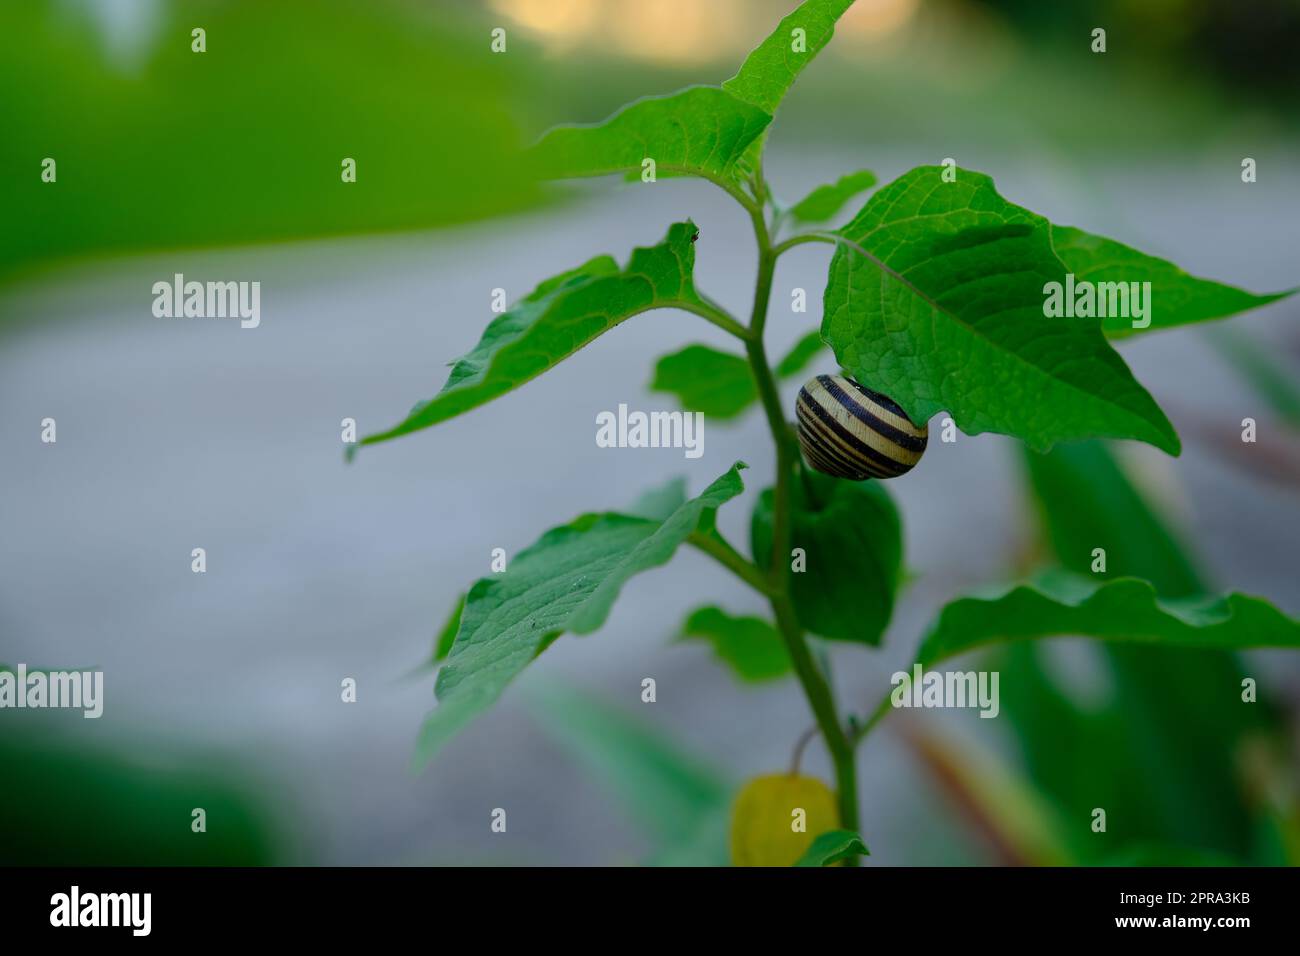 snail crawls on a physalis branch on suny day Stock Photo